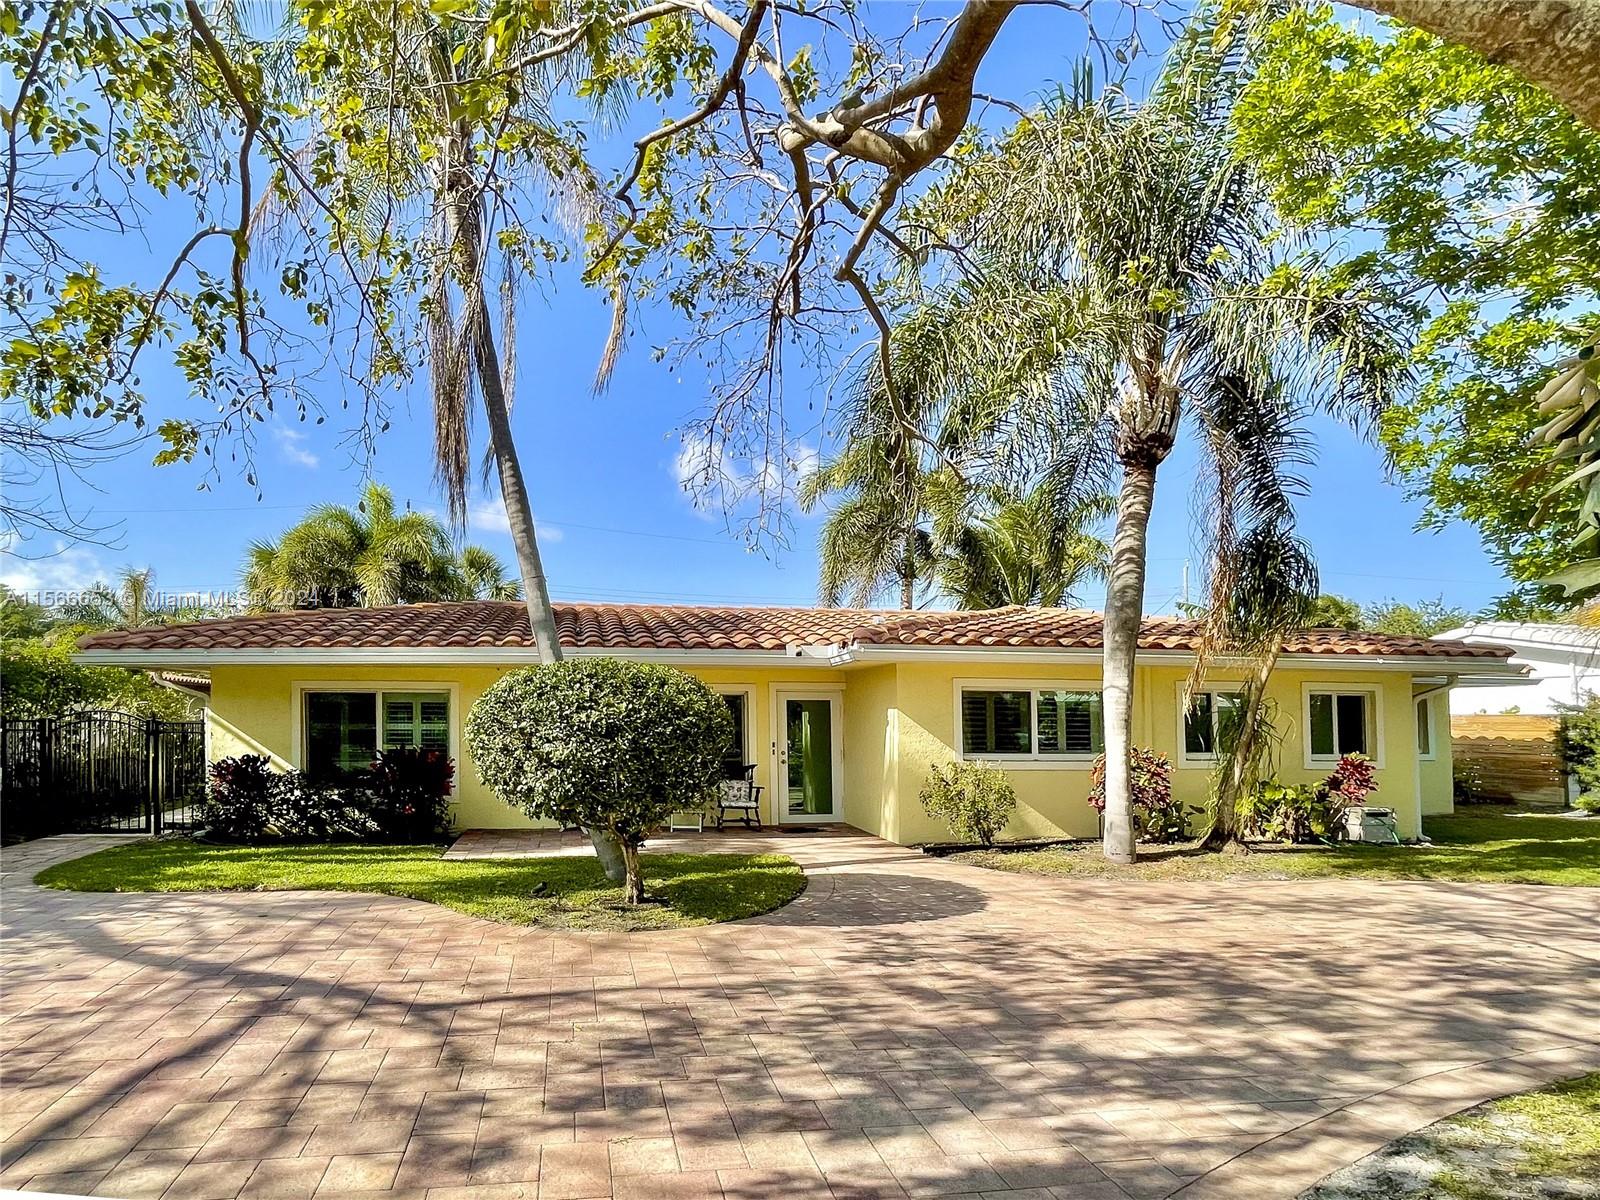 Step into this remodeled home in the heart of Deerfield Beach. Boasting a resort-style backyard surrounded by lush landscaping, and a sparkling salt-water heated pool that beckons relaxation and enjoyment year round. A serene oasis perfect for unwinding or entertaining family&friends. Ideal for a young family, a winter get-away-home, or a lucrative short-term rental income investment. Newer AC, ducts, insulation, appliances, rewired electrical, Impact low E doors and windows. Located within walking distance to pristine white-sand beaches, an array of restaurants, shops, and amenities. This home is the epitome of coastal Florida living. Whether you're strolling along the shore, indulging in fine dining, or exploring the vibrant local scene, everything you desire is right at your fingertips.